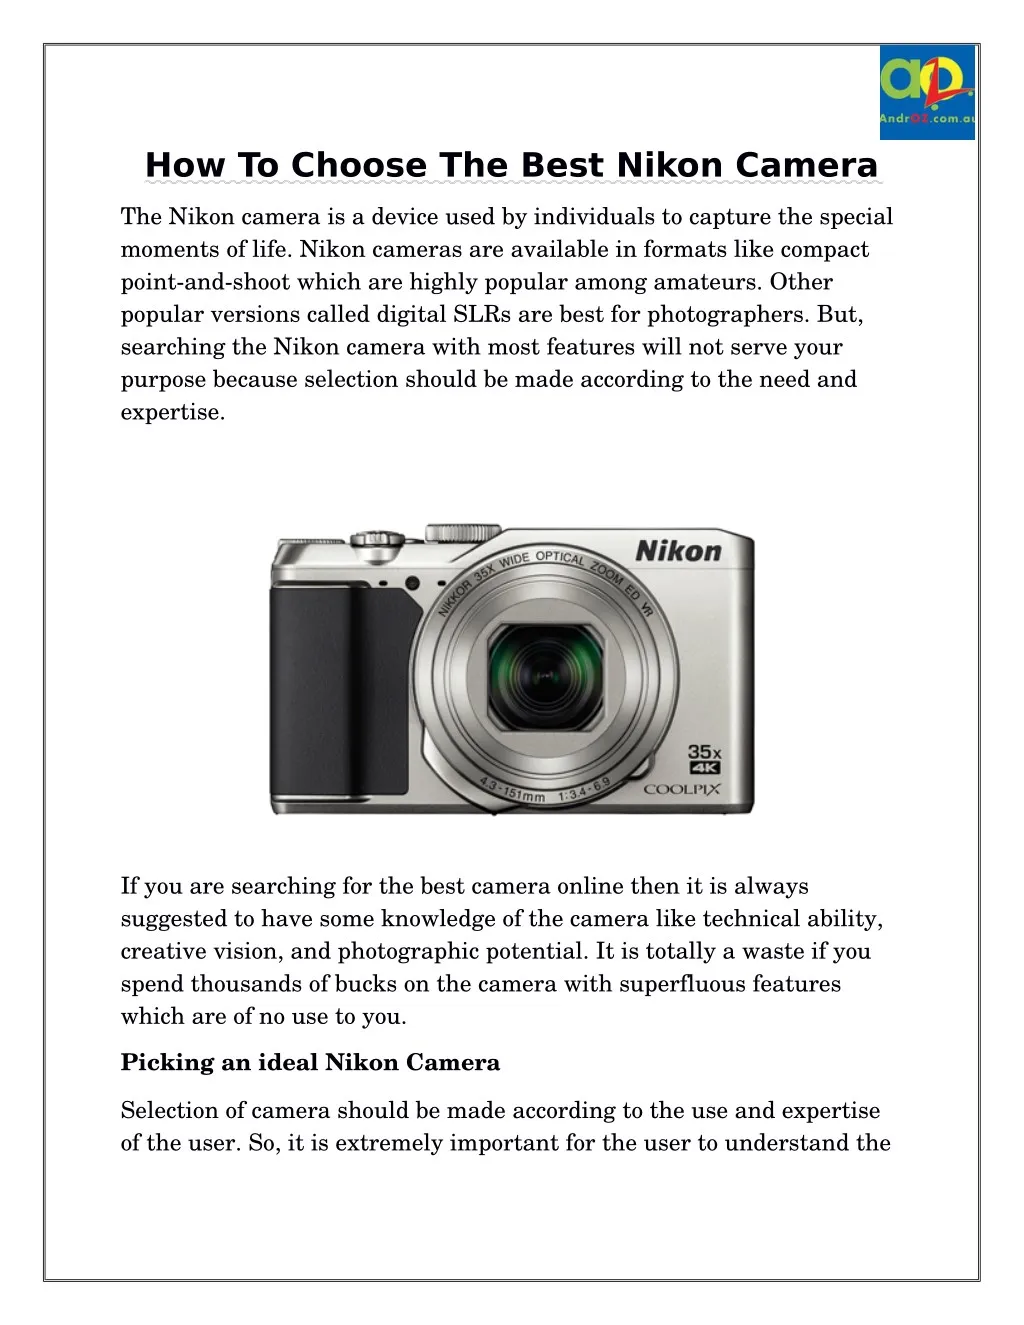 how to choose the best nikon camera